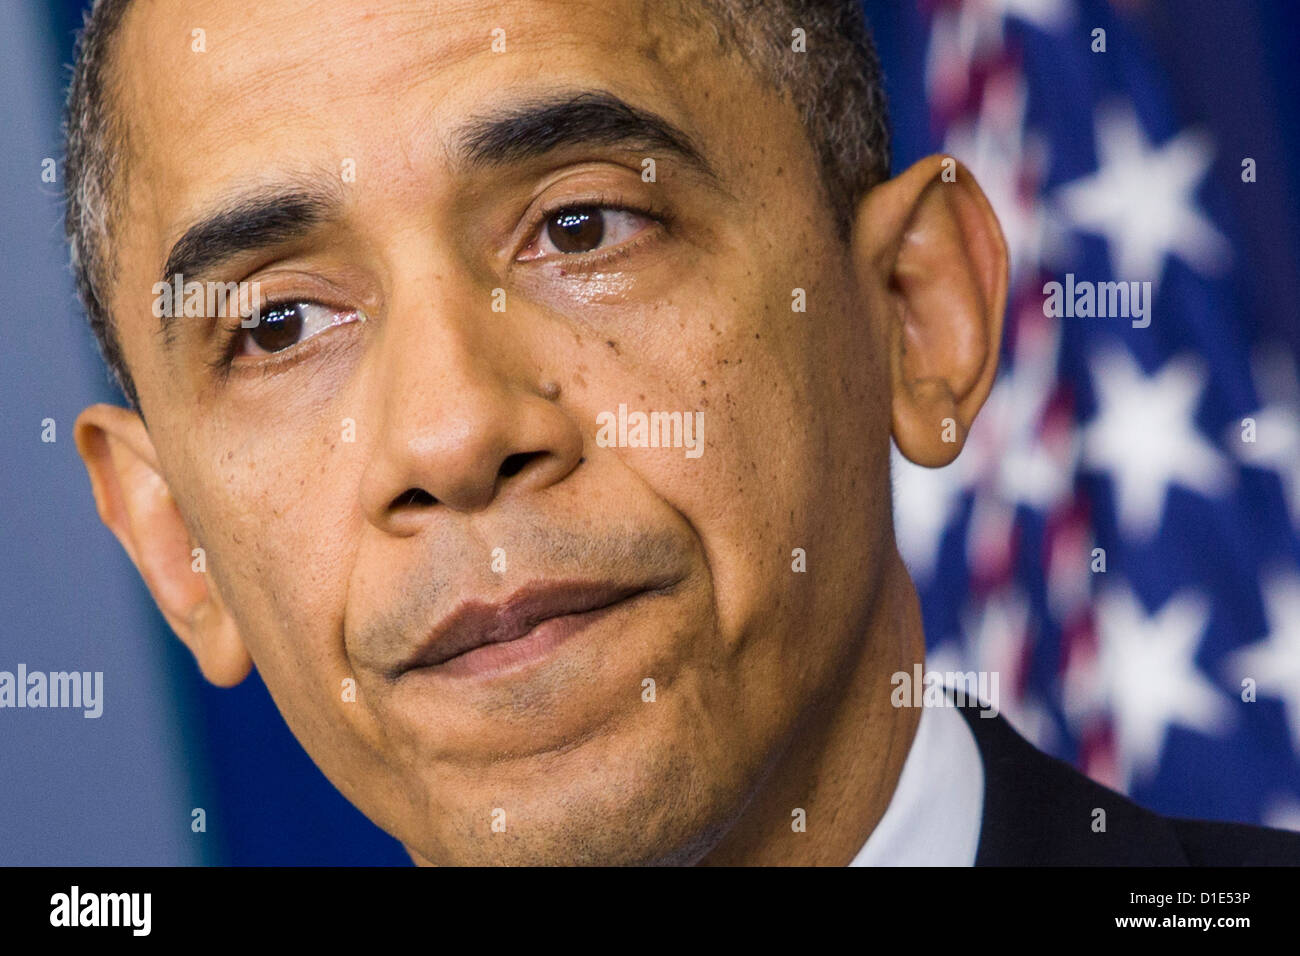 United States President Barack Obama eyes are wet with tears as he delivers remarks in the Brady Press Briefing Room of the White House in Washington, D.C. in response to the school shooting at Sandy Hook Elementary School in Newtown, Connecticut that left 28 students and adults dead on Friday, December 14, 2012. .Credit: Kristoffer Tripplaar / Pool via CNP Stock Photo